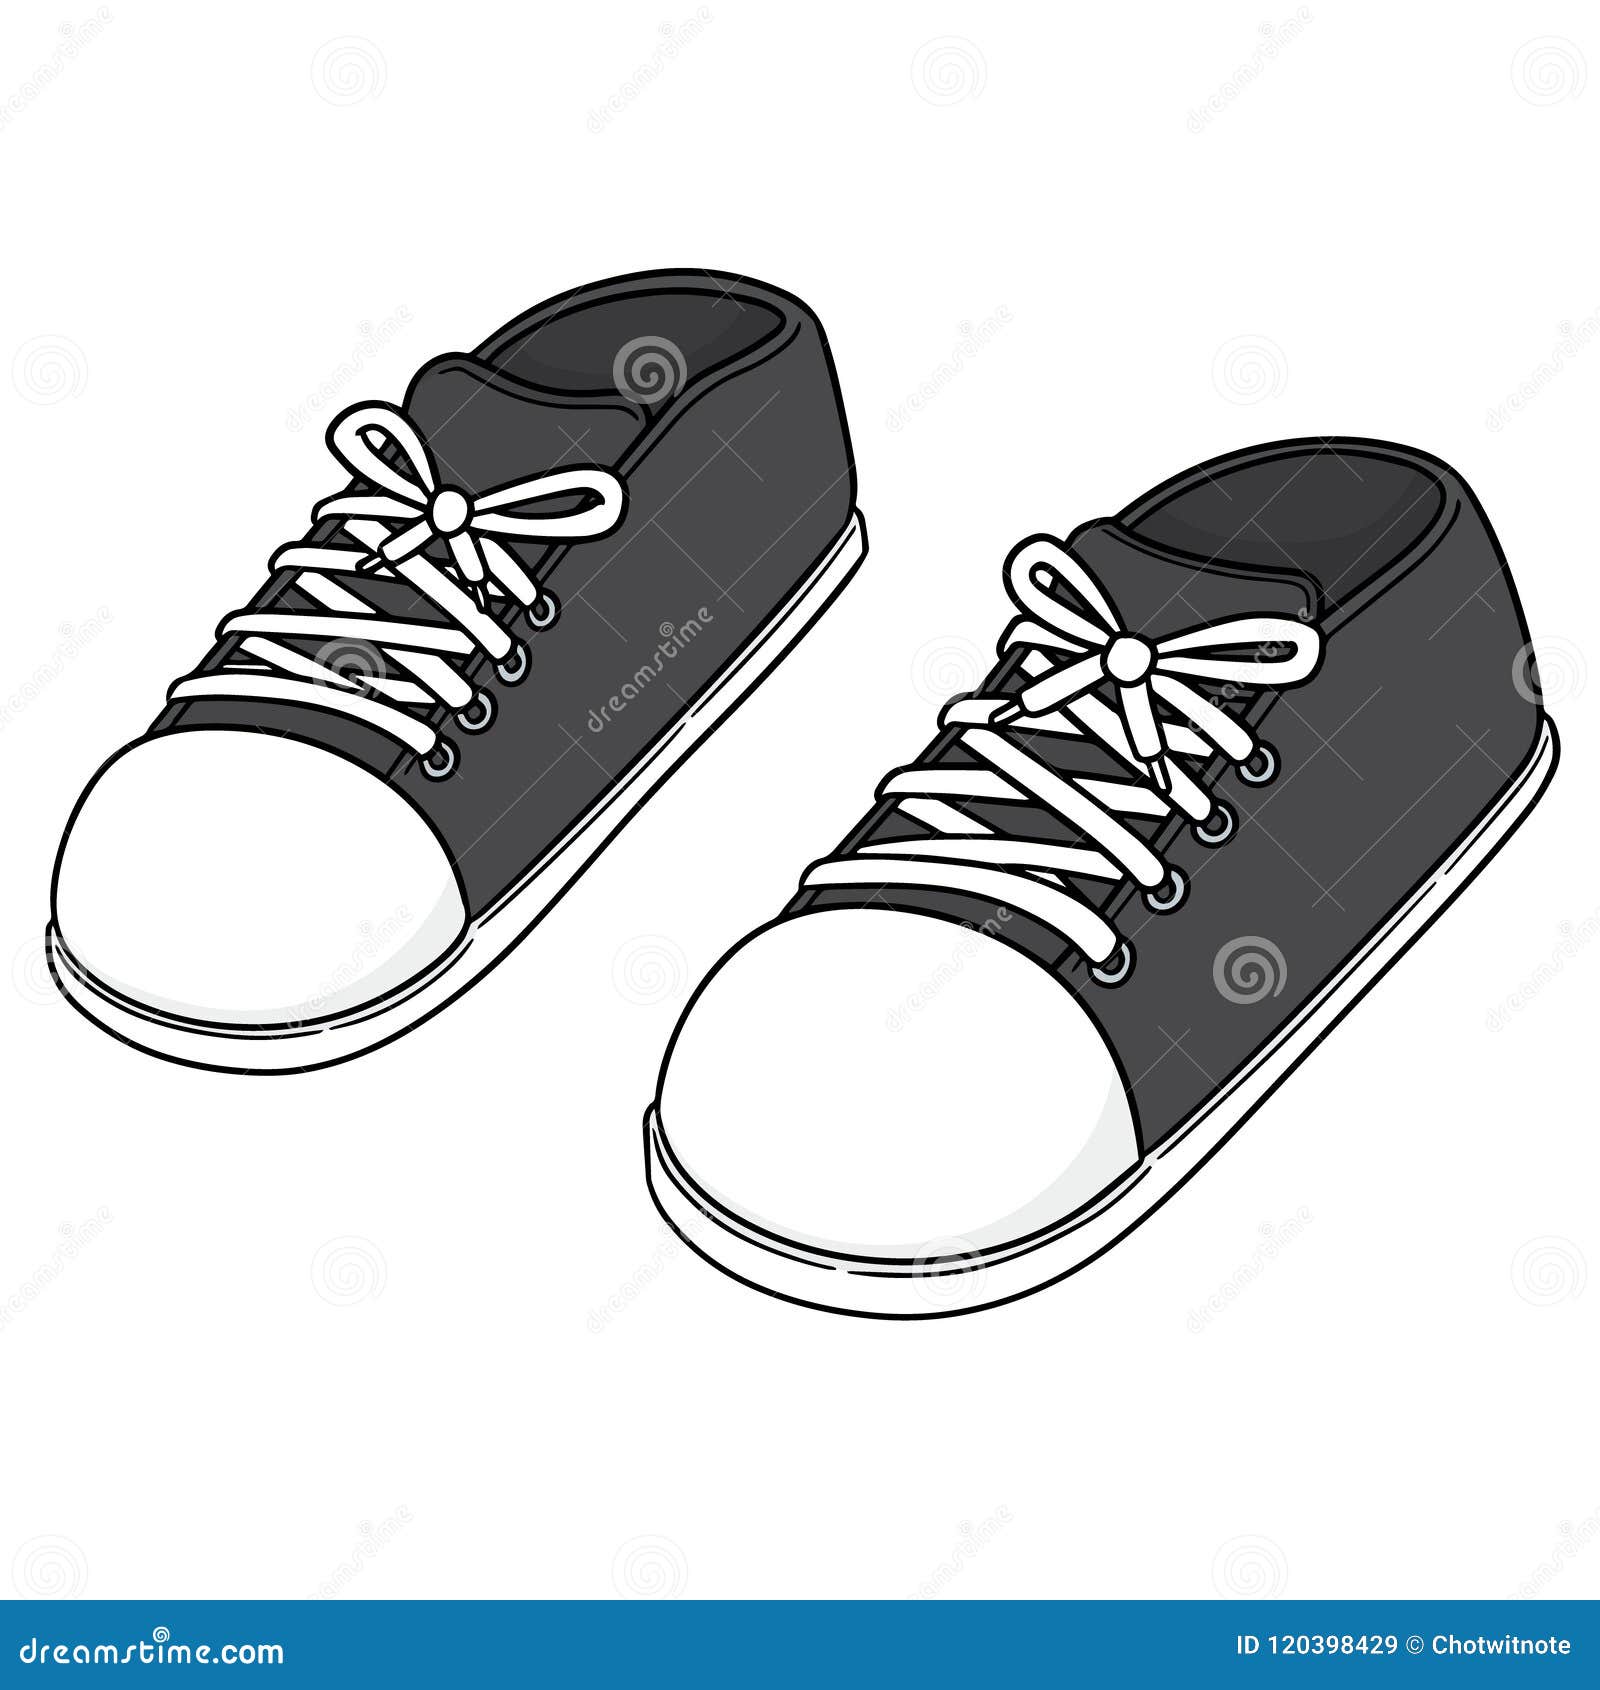 Vector of shoes stock vector. Illustration of illustrate - 120398429